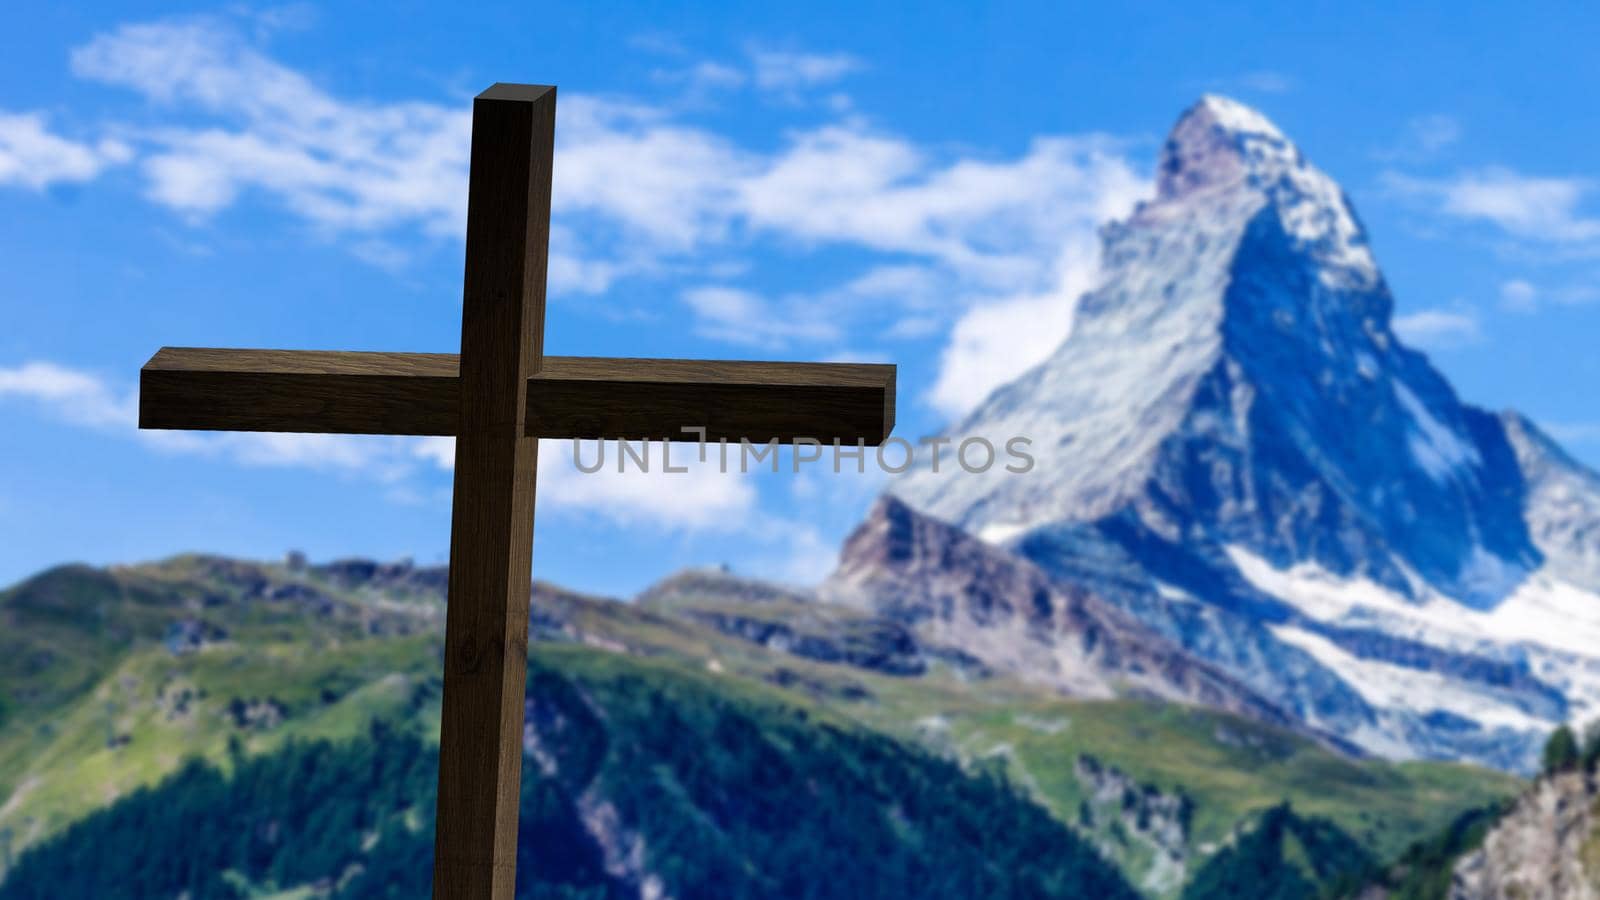 Religious concepts. Christian wooden cross on a background with dramatic lighting, Jesus Christ cross, Easter, resurrection concept. Christianity, Religion copyspace background.